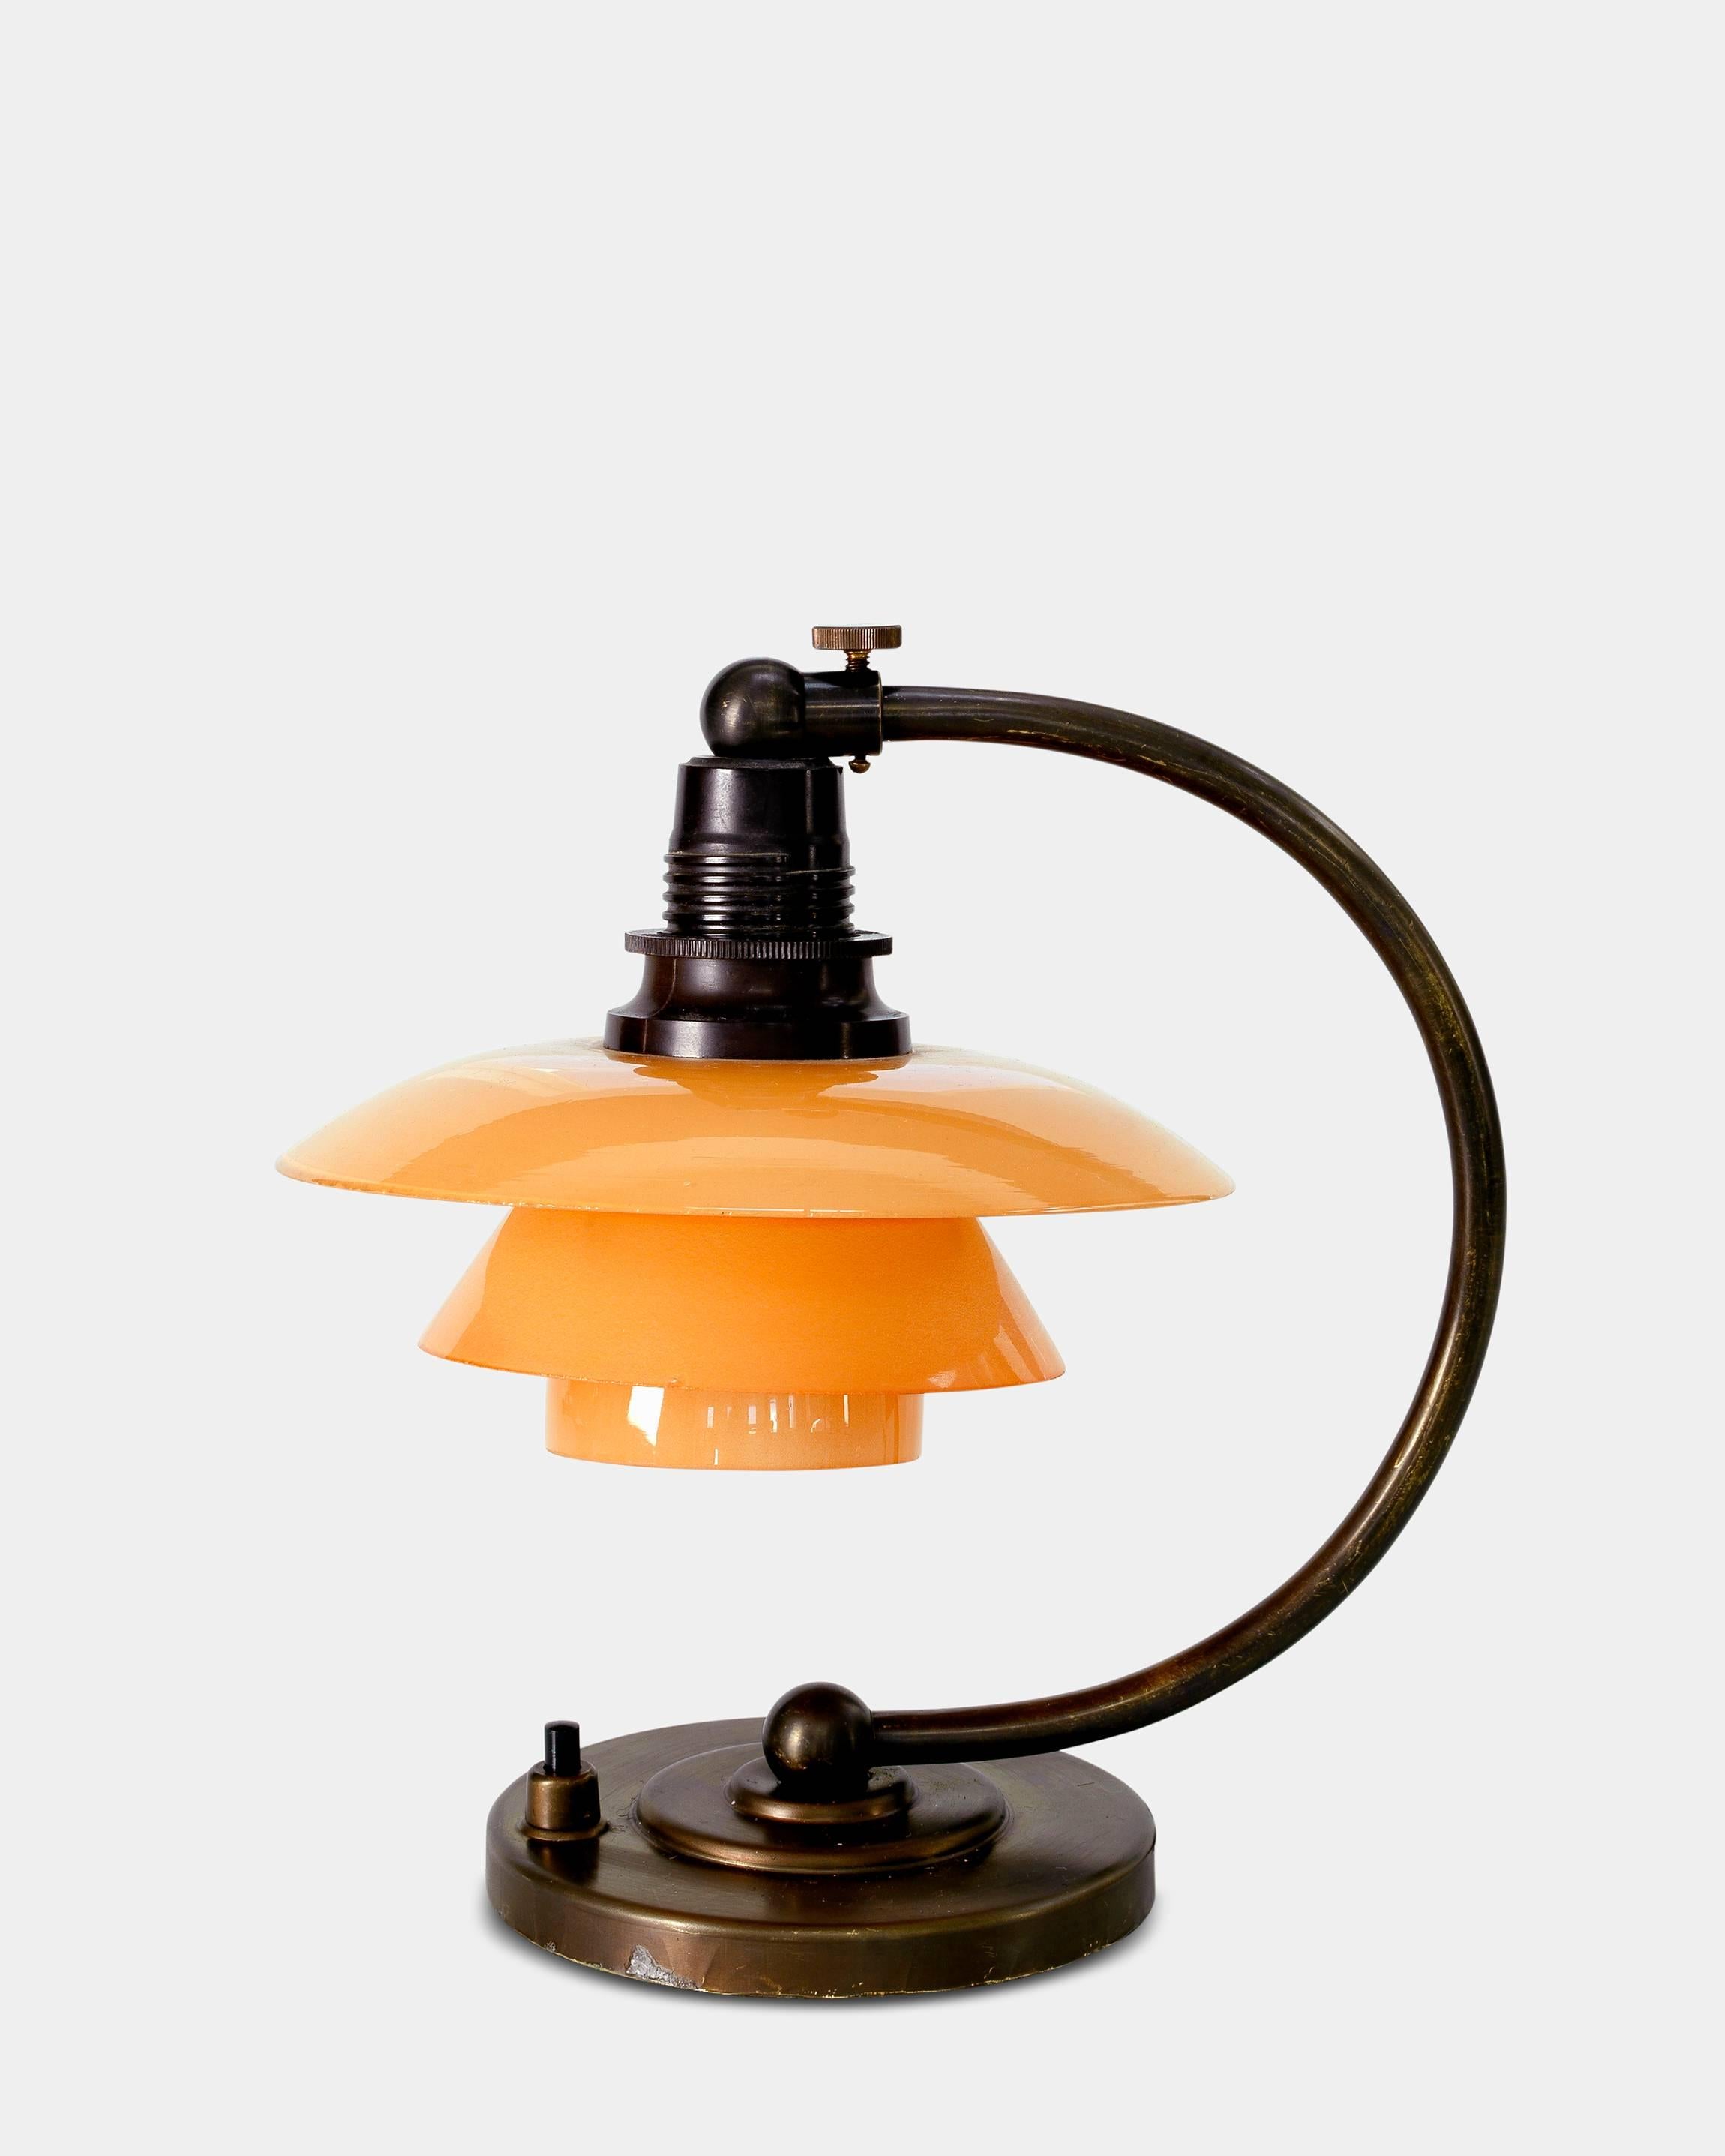 Poul Henningsen (1894-1967) 
1/1 PH table lamp, with browned brass stand, socket in bakelite and with a set of rare rose colored glass shades. Produced by Louis Poulsen in 1936. Stamped PATENTED and thereby a unique vintage piece by Poul Henningsen.